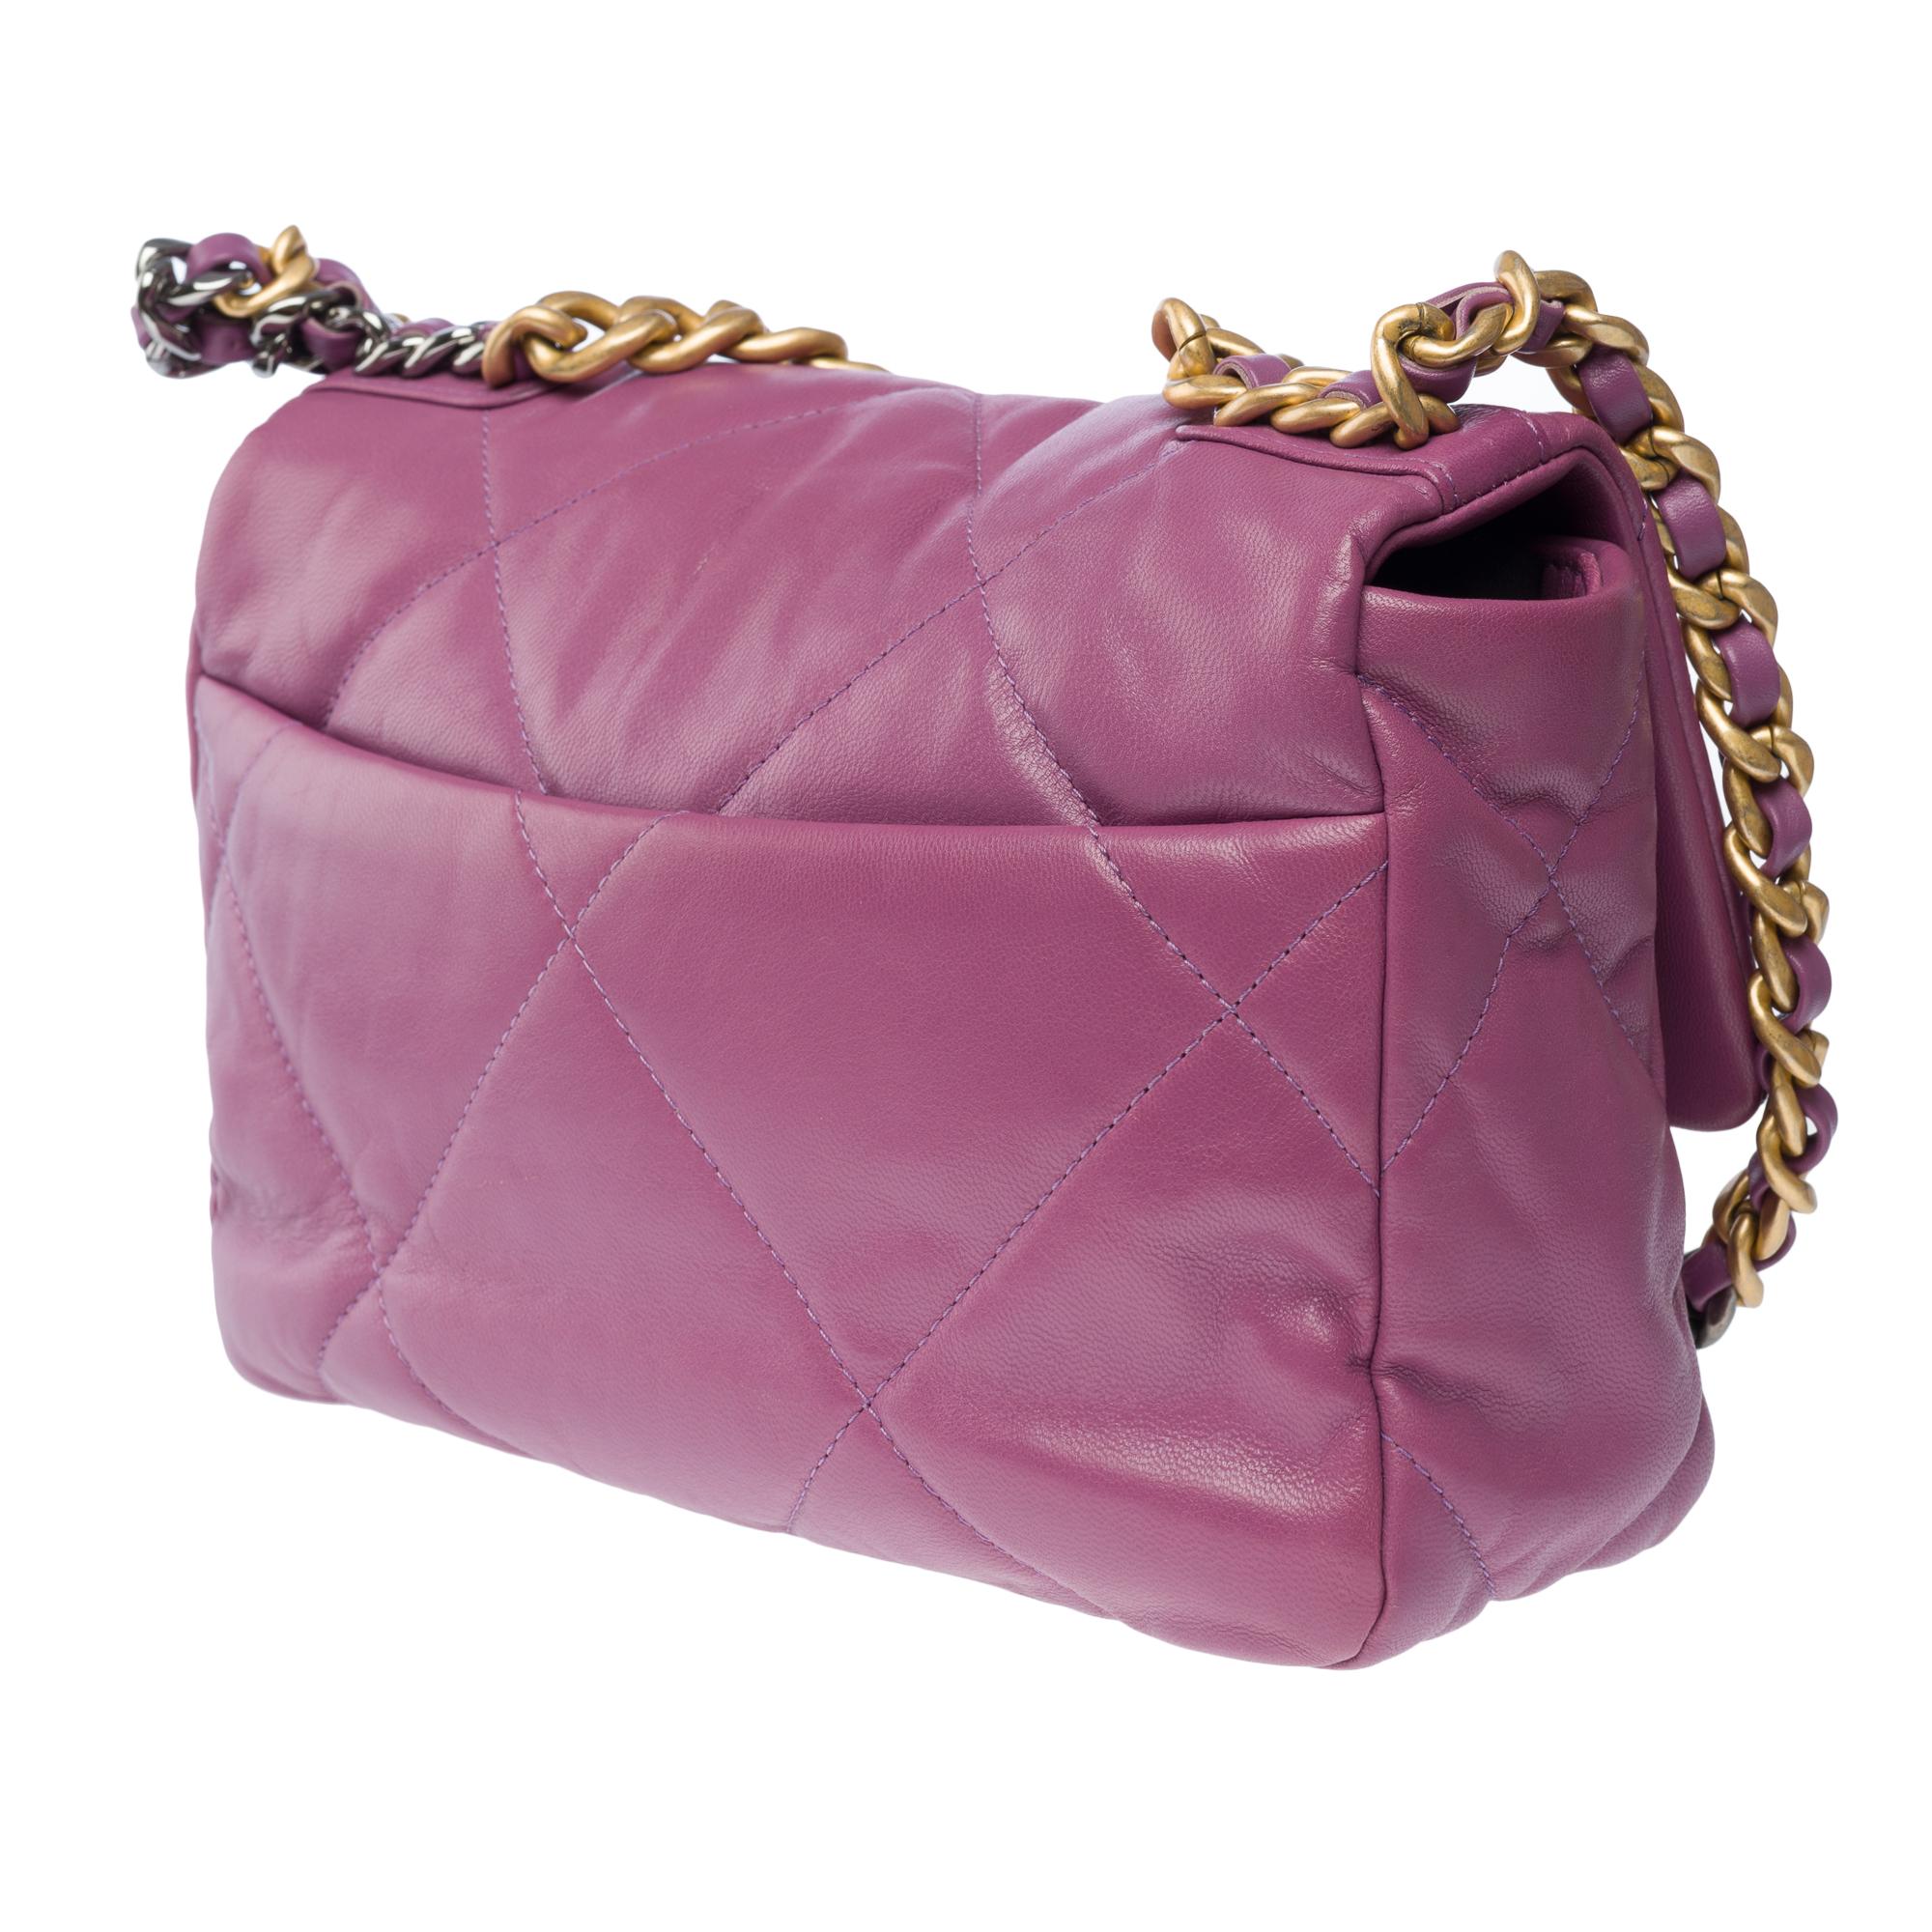 Stunning Chanel 19 shoulder bag in purple quilted leather , Matt gold and SHW For Sale 2